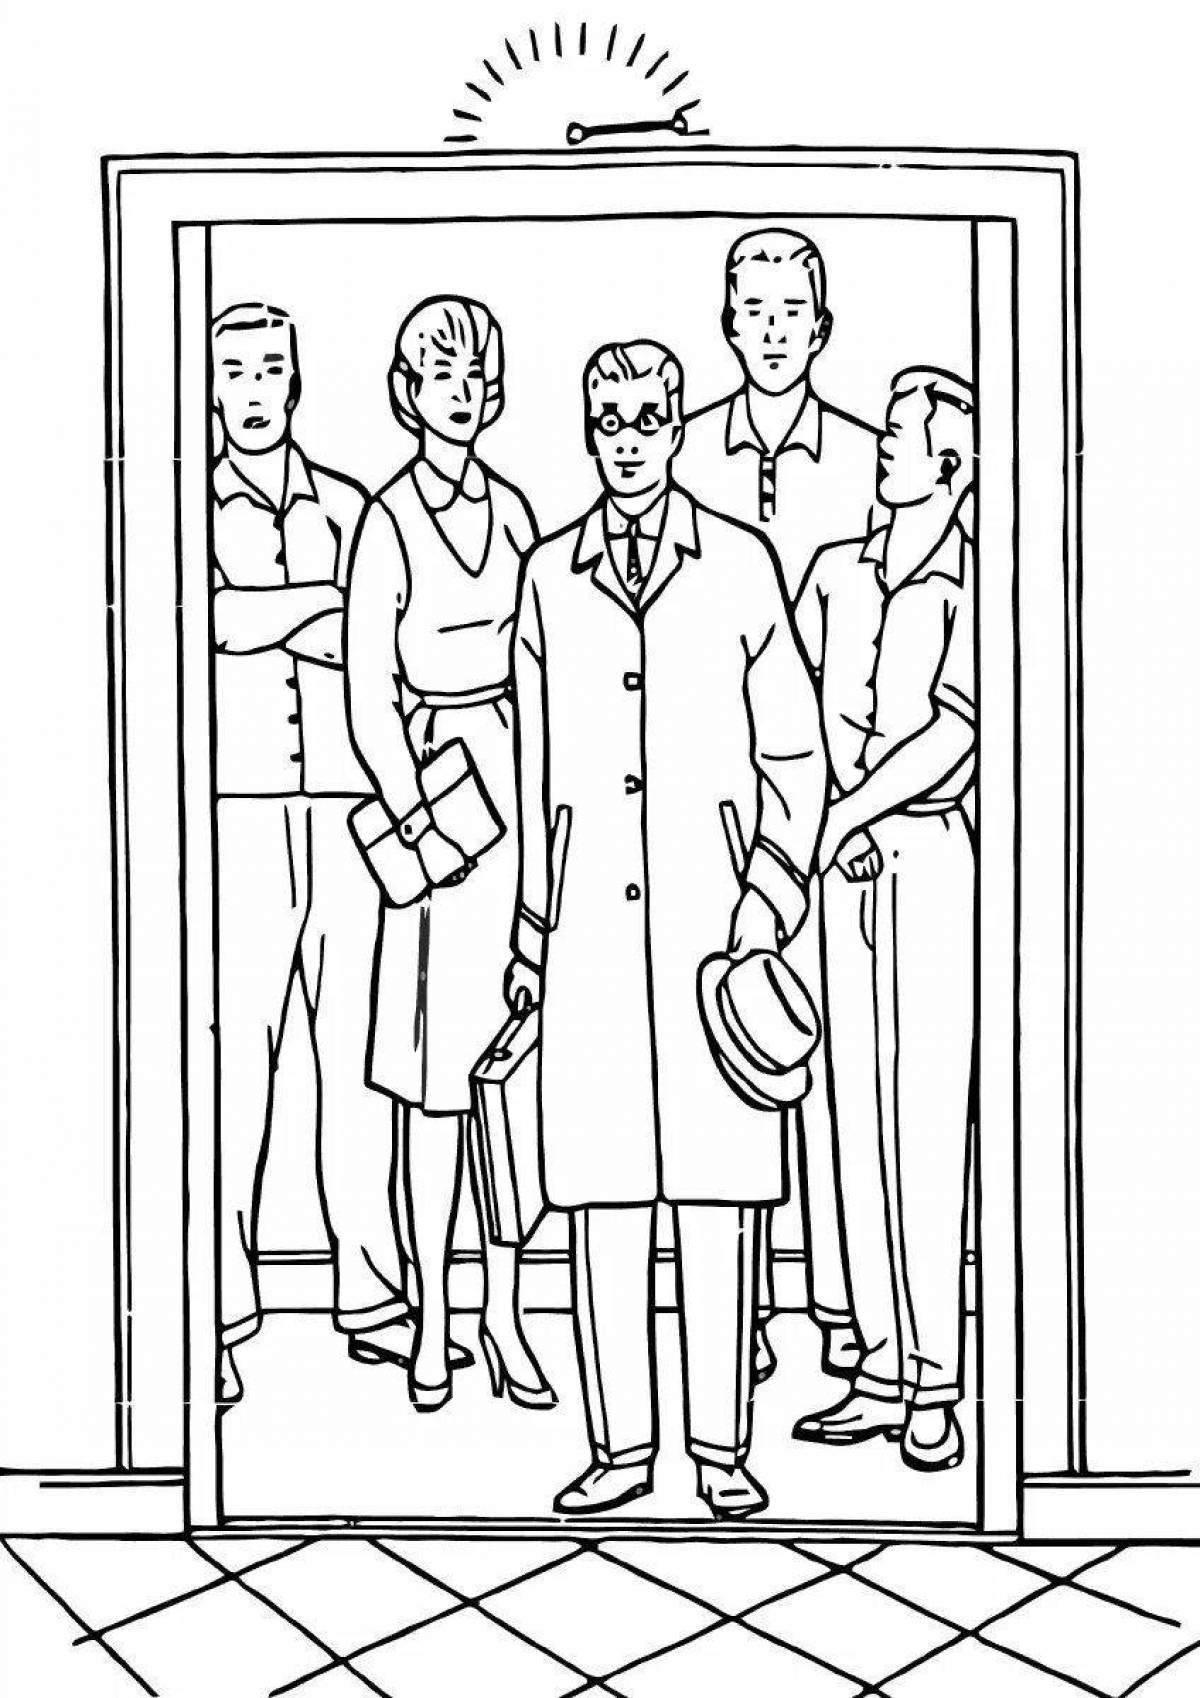 Amazing elevator coloring page